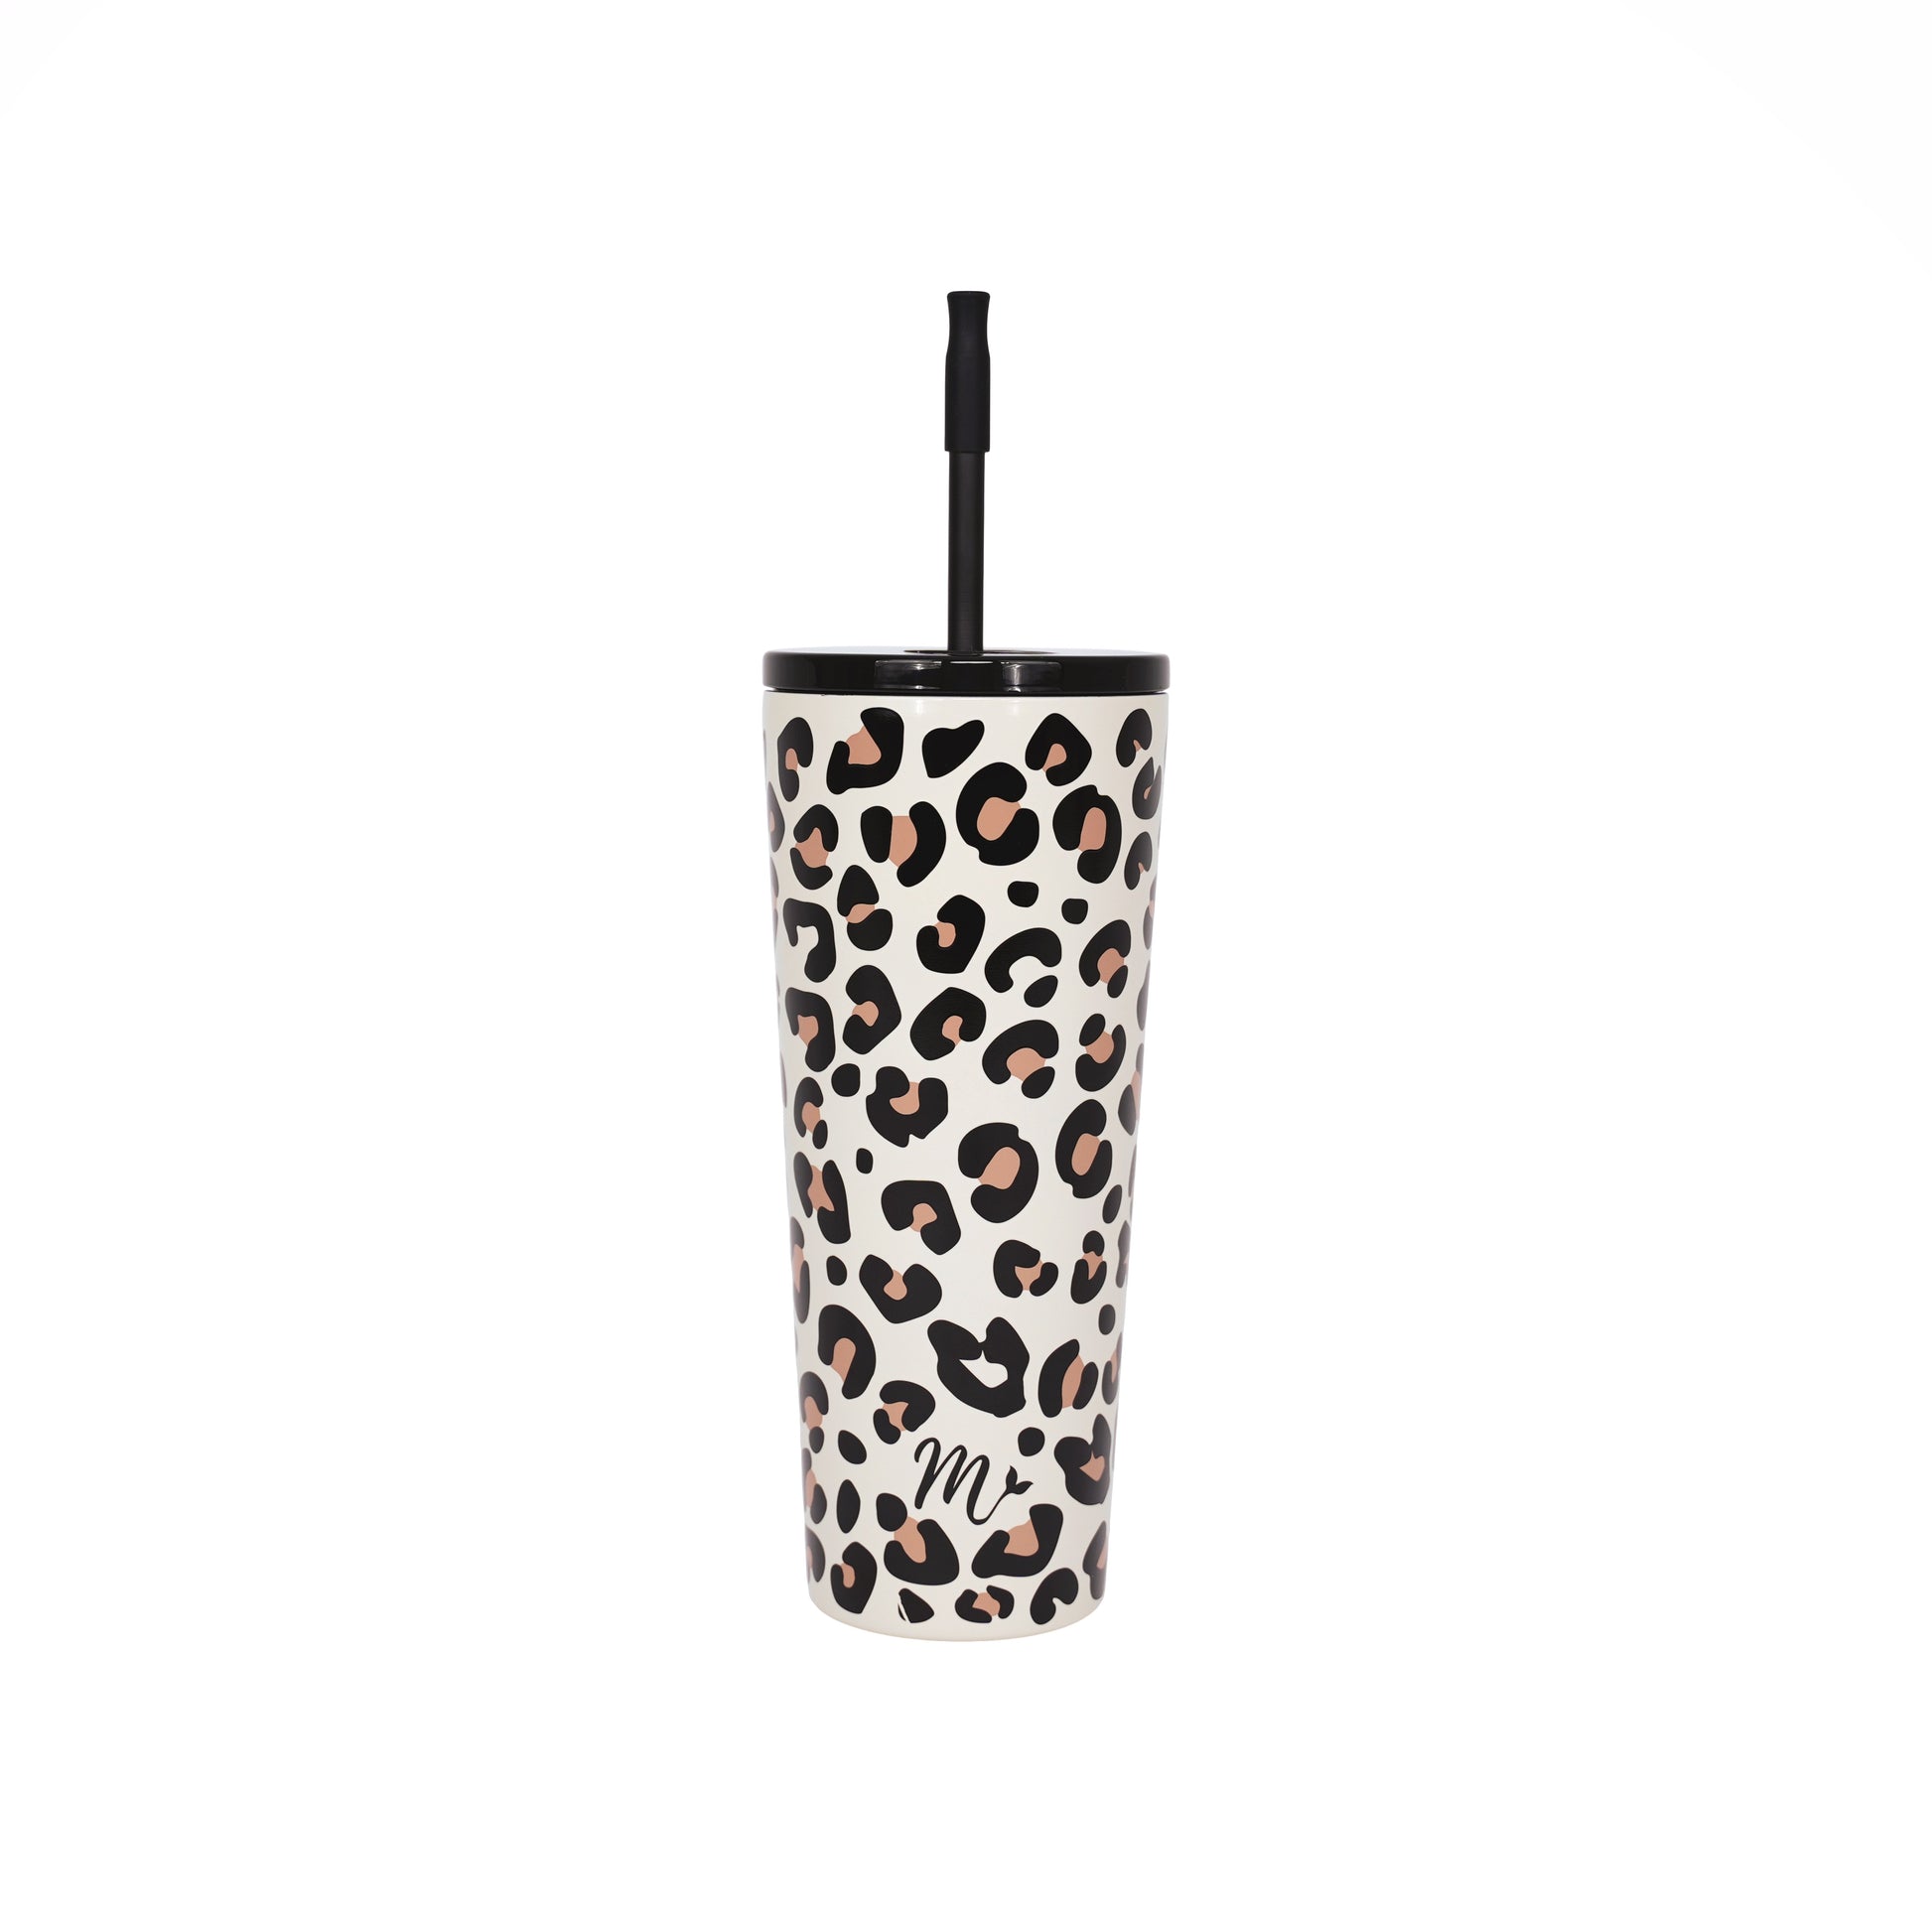 animal print tumbler, keeps drinks cold, leakproof tumbler, super cute, trendy, straw included